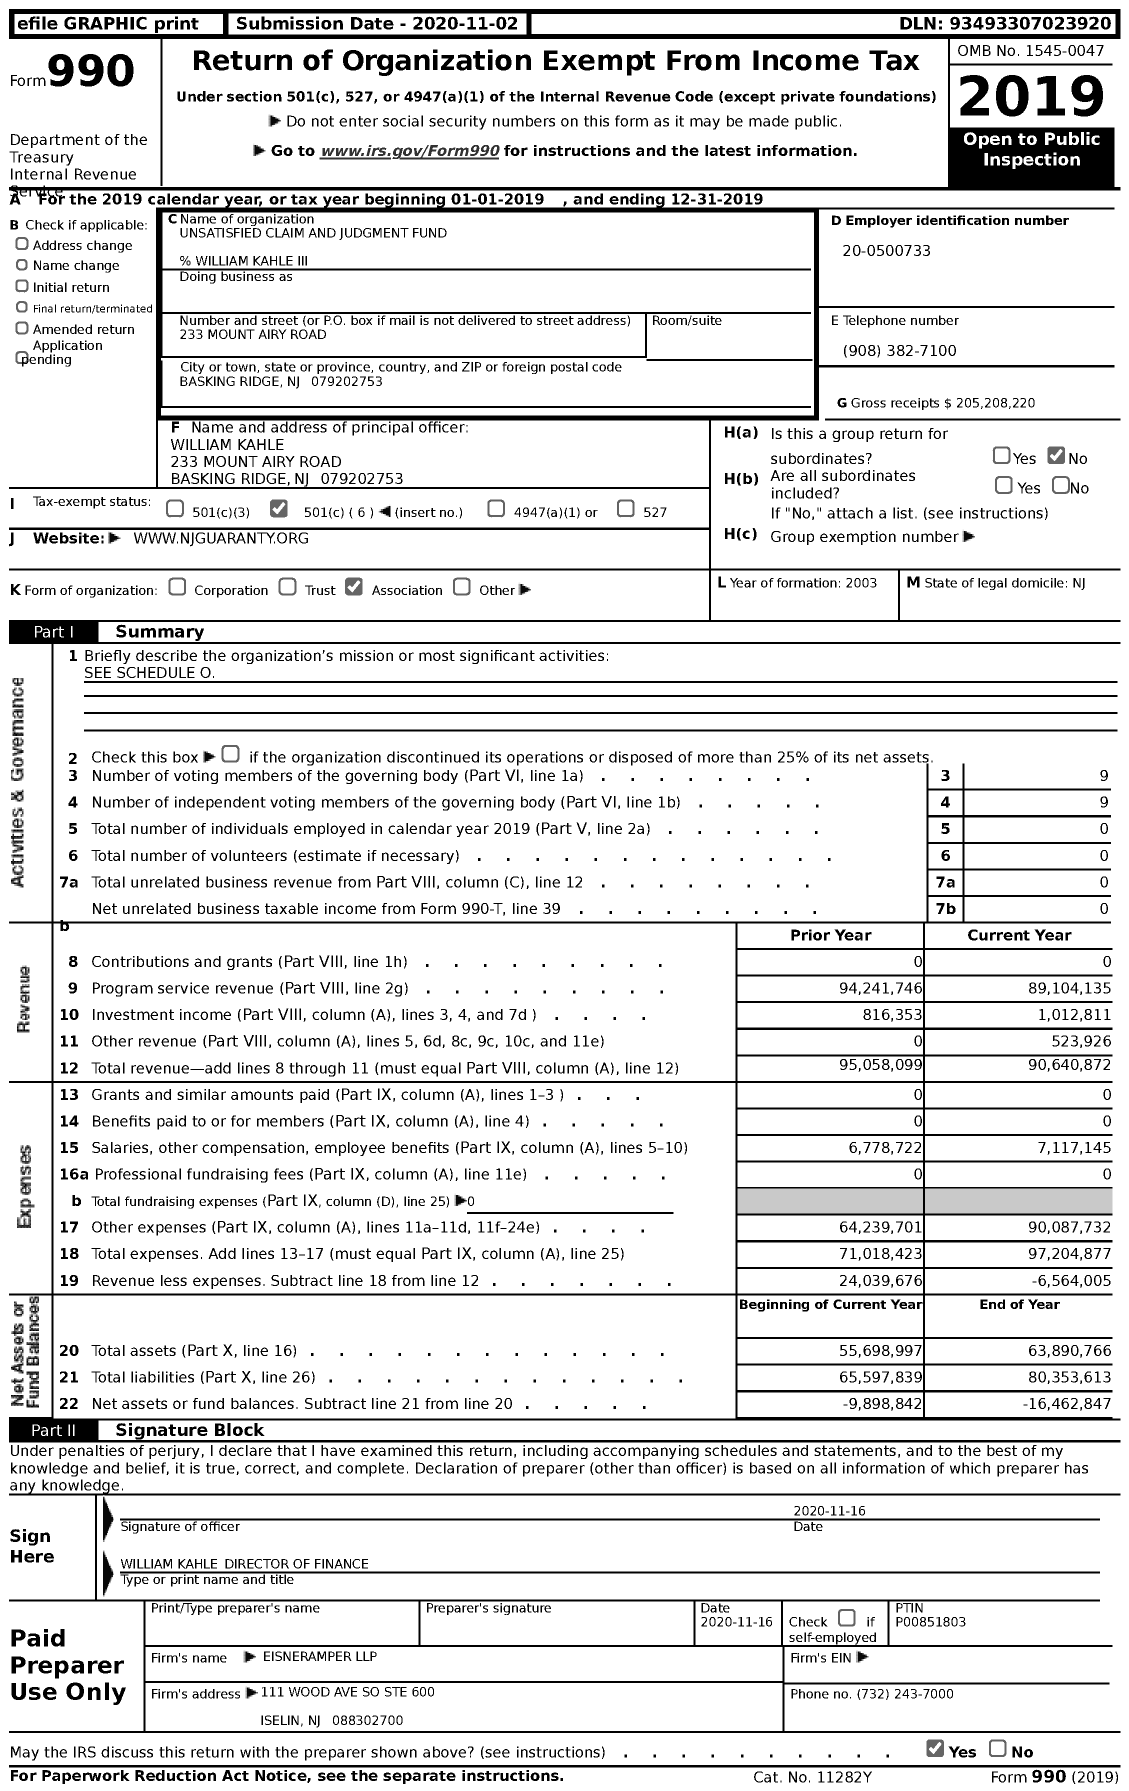 Image of first page of 2019 Form 990 for Unsatisfied Claim and Judgment Fund (UCJF)